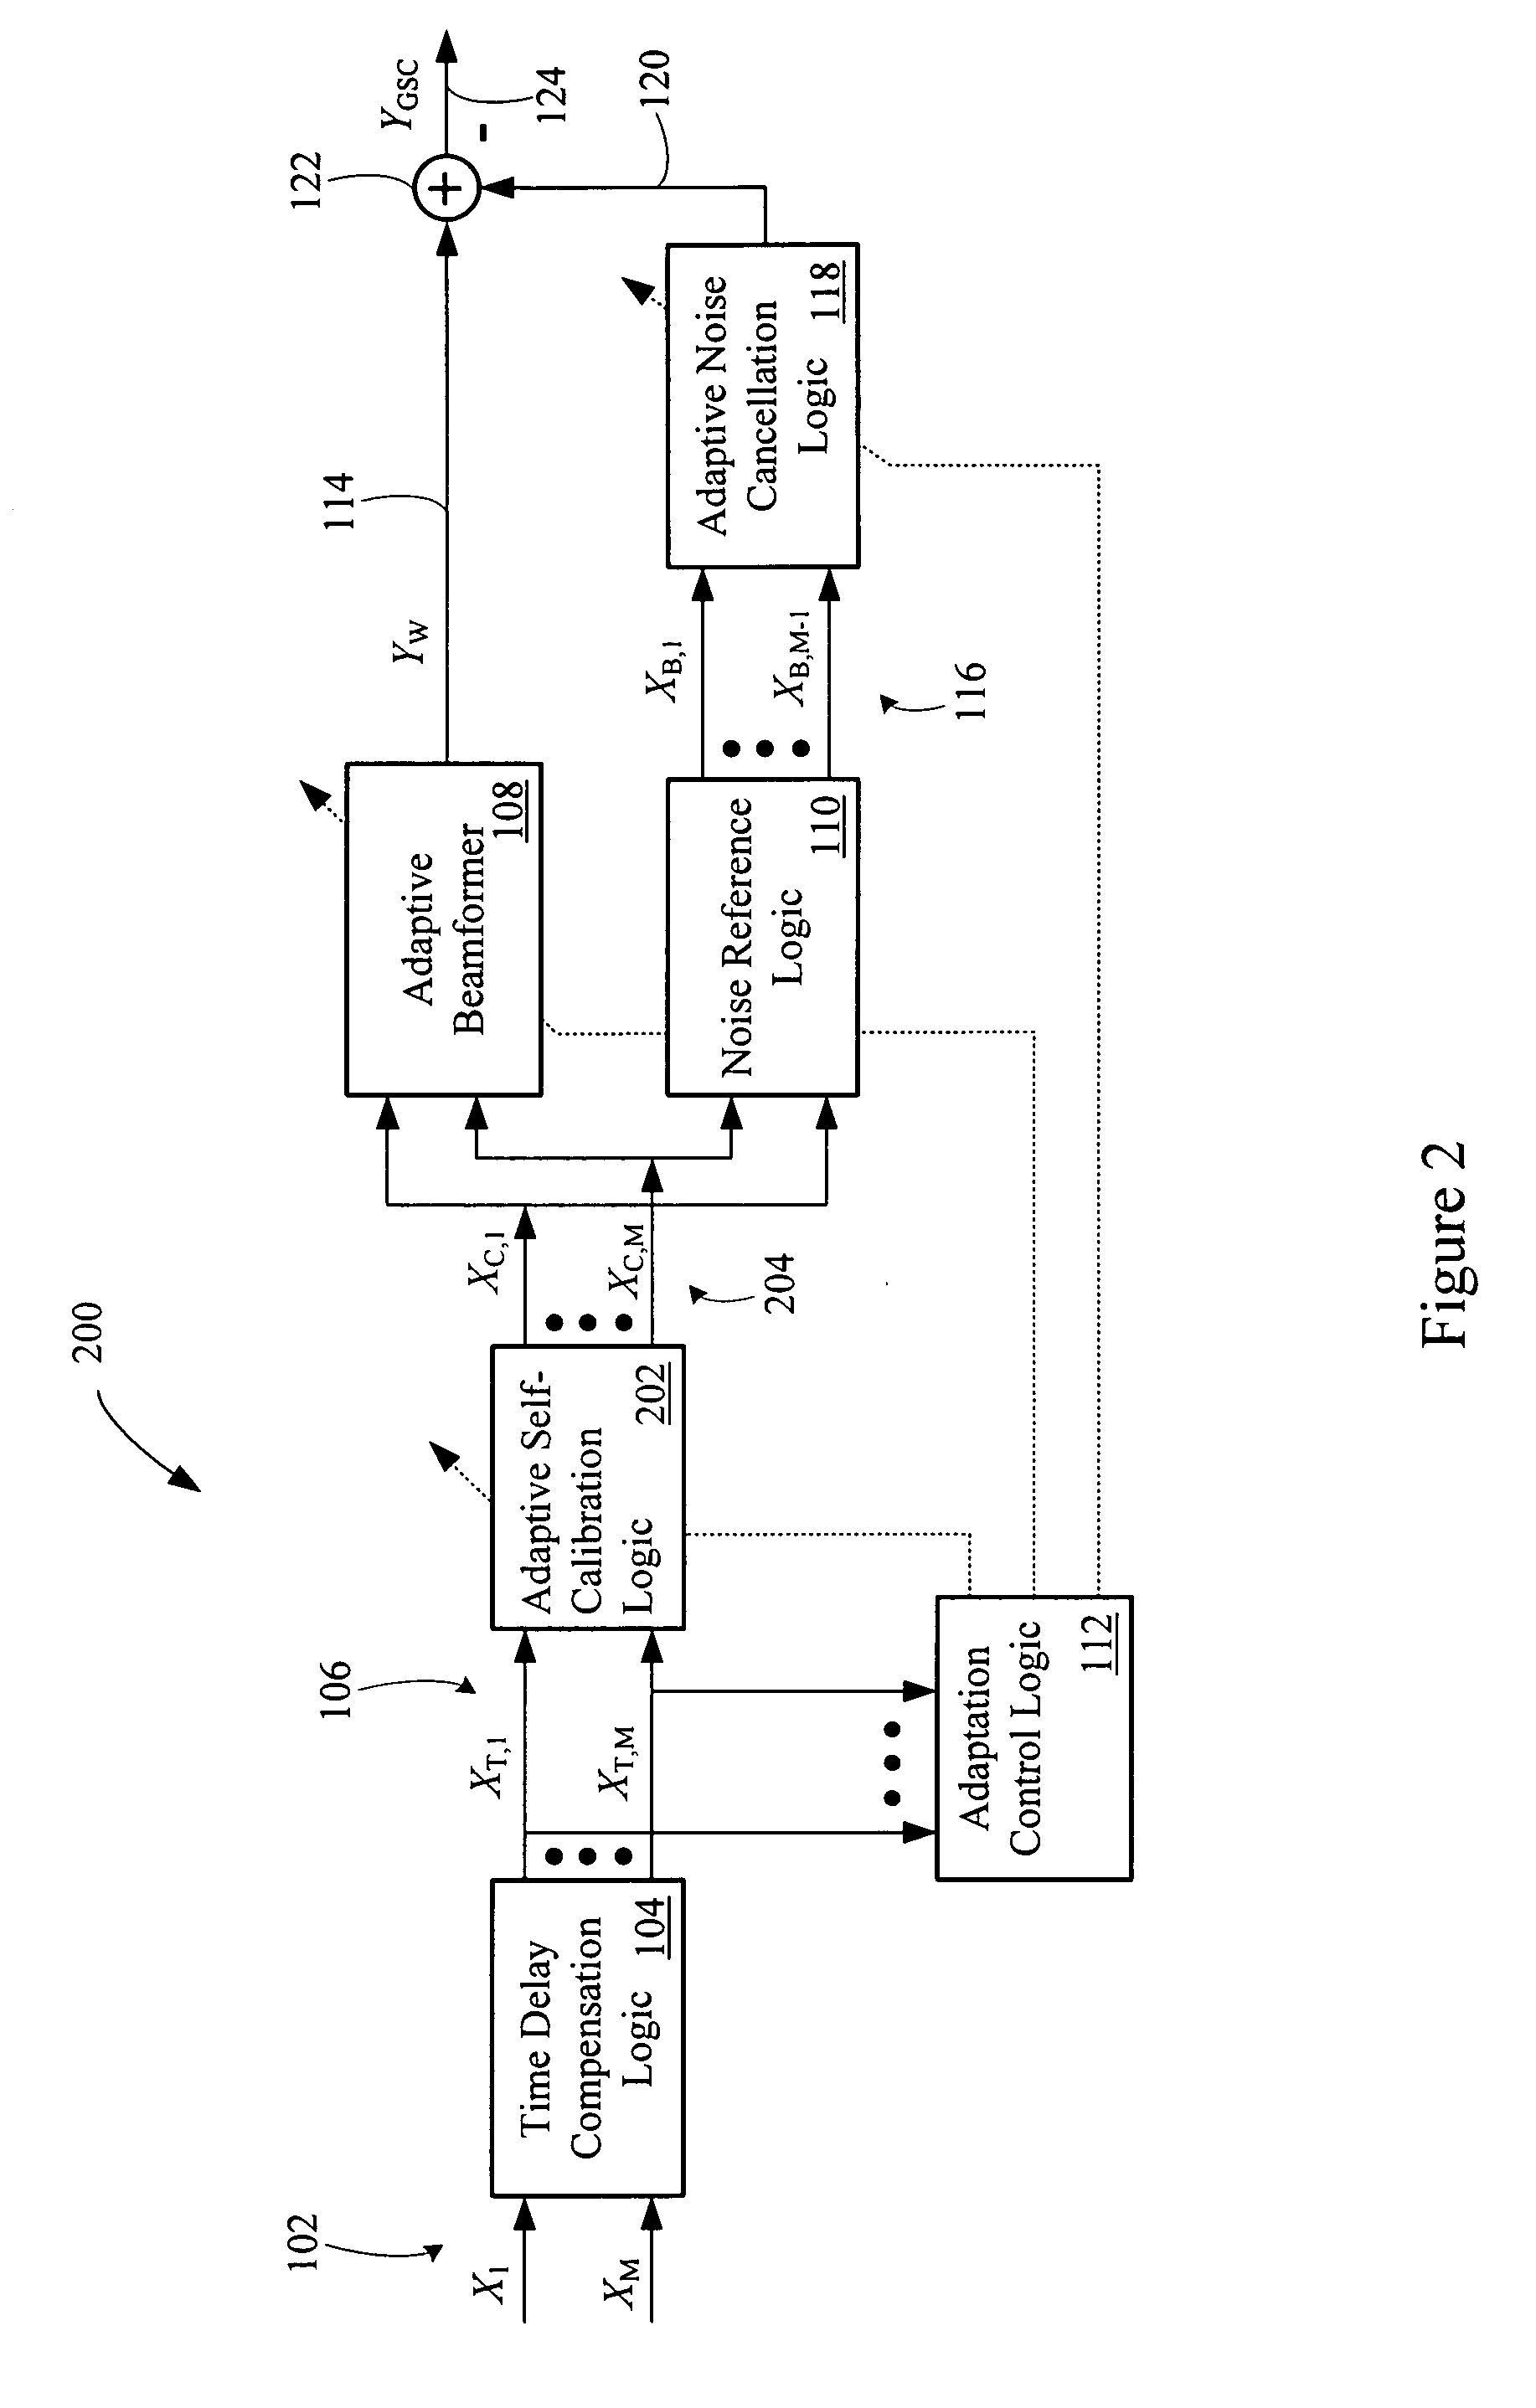 Multi-channel adaptive speech signal processing system with noise reduction